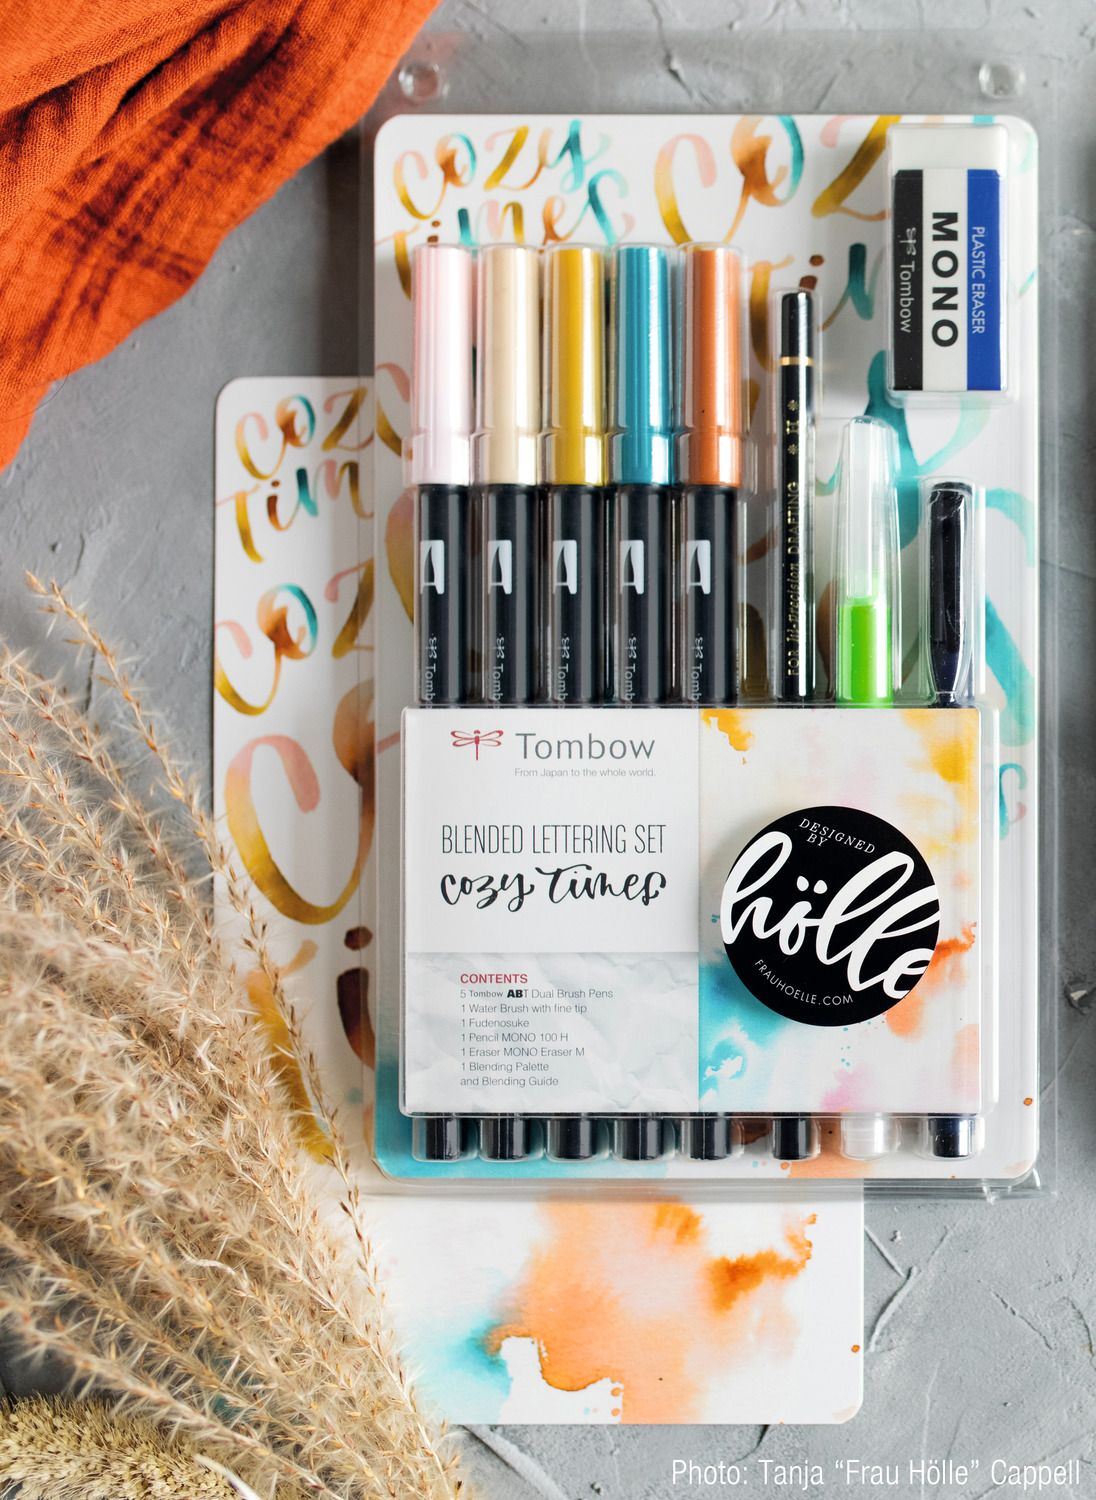 Tombow • Blended lettering set Cozy times